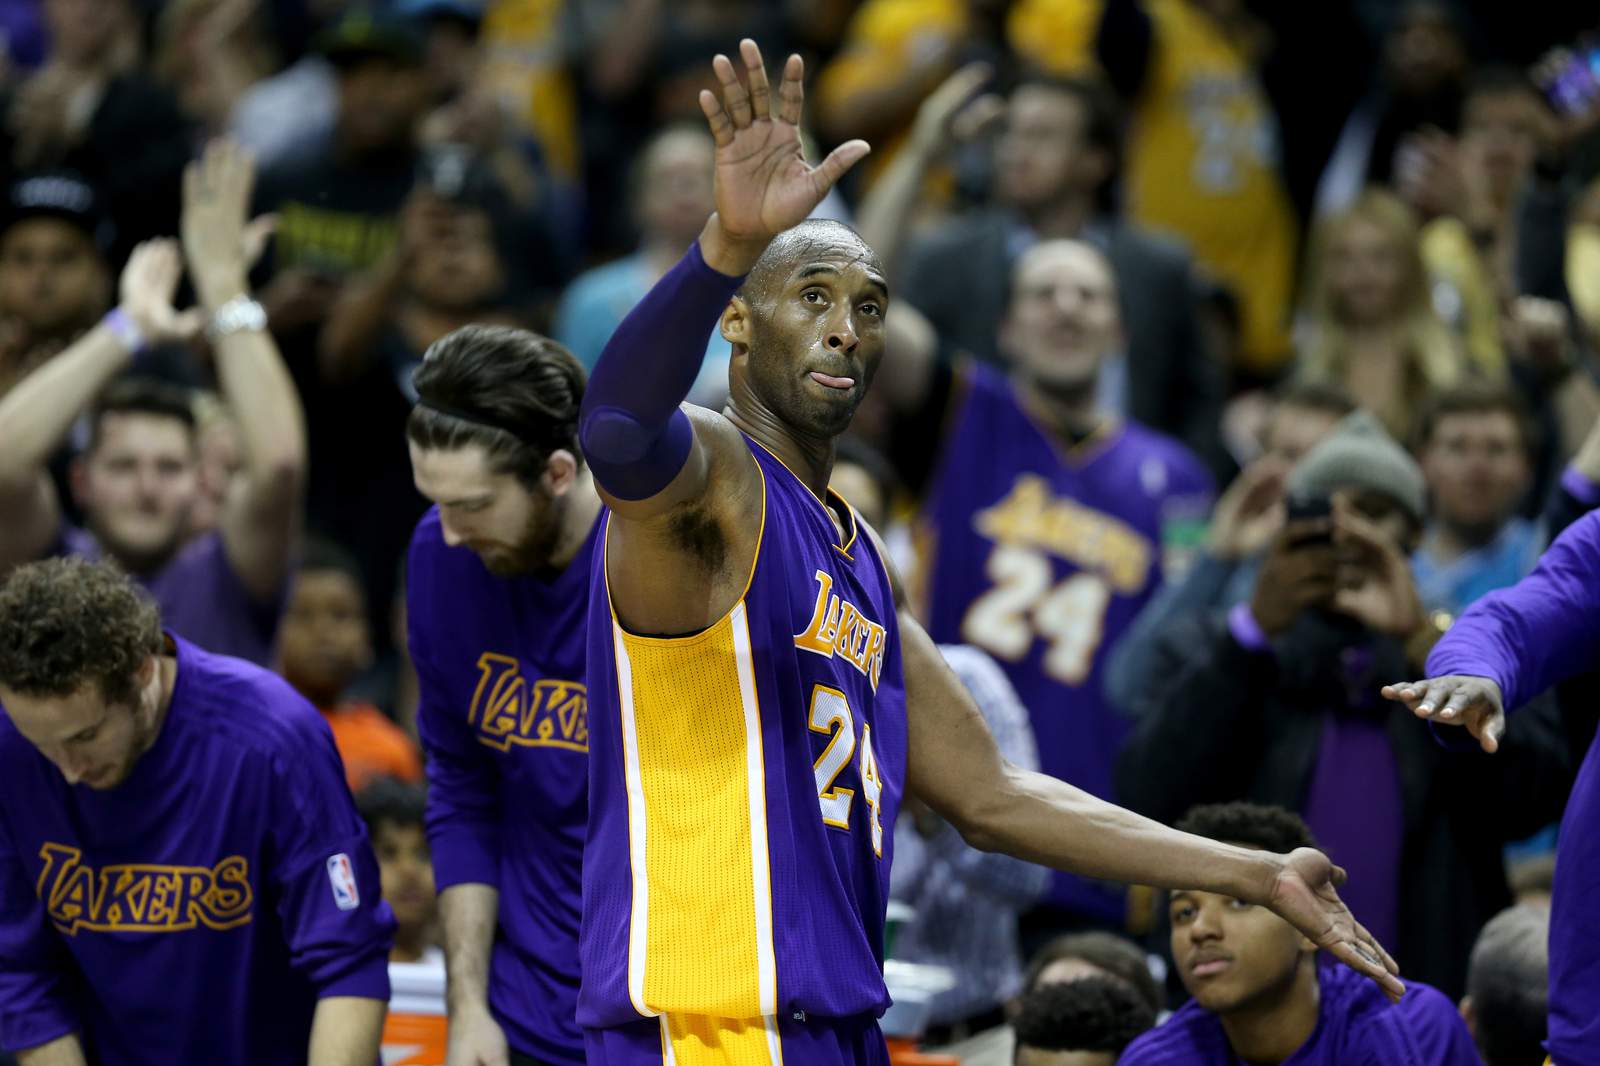 Kobe Bryant goes out of the game as the Charlotte Hornets defeated the Los Angeles Lakers 108-98 at Time Warner Cable Arena on Dec. 28, 2015.